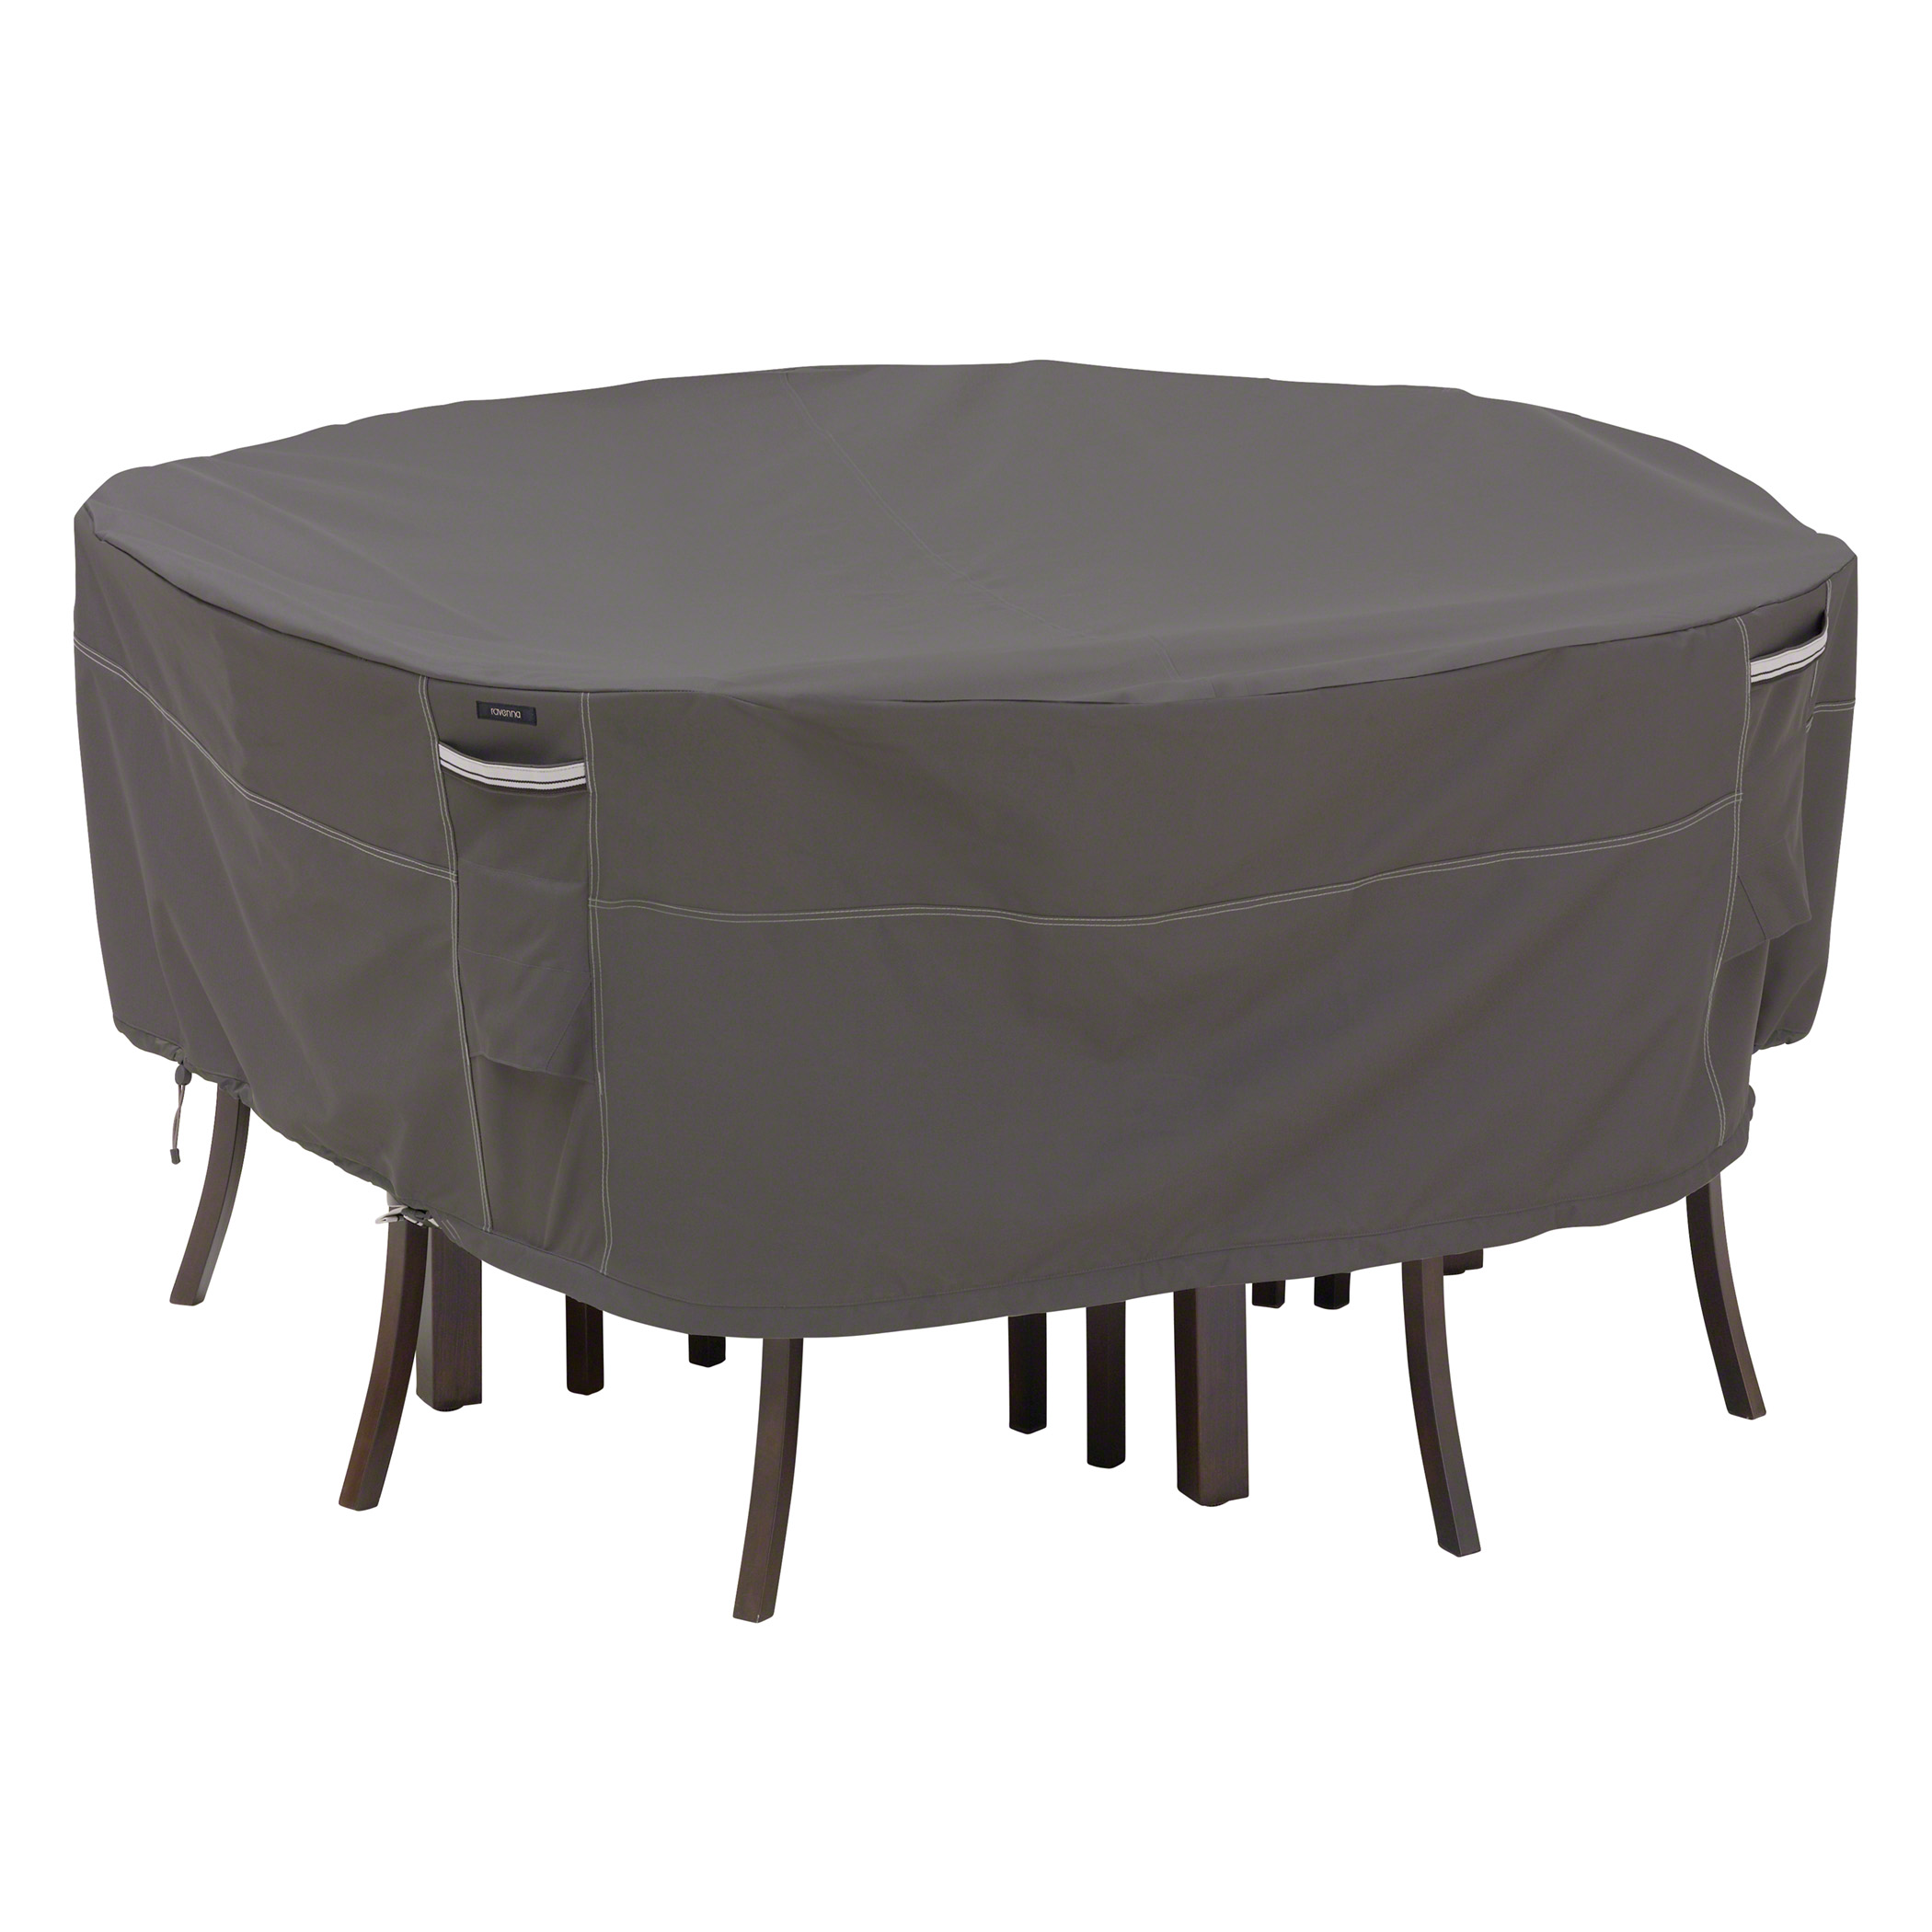 Classic Accessories Extra-Large Ravenna Round Premium Patio Furniture Table & Chairs Cover Black New